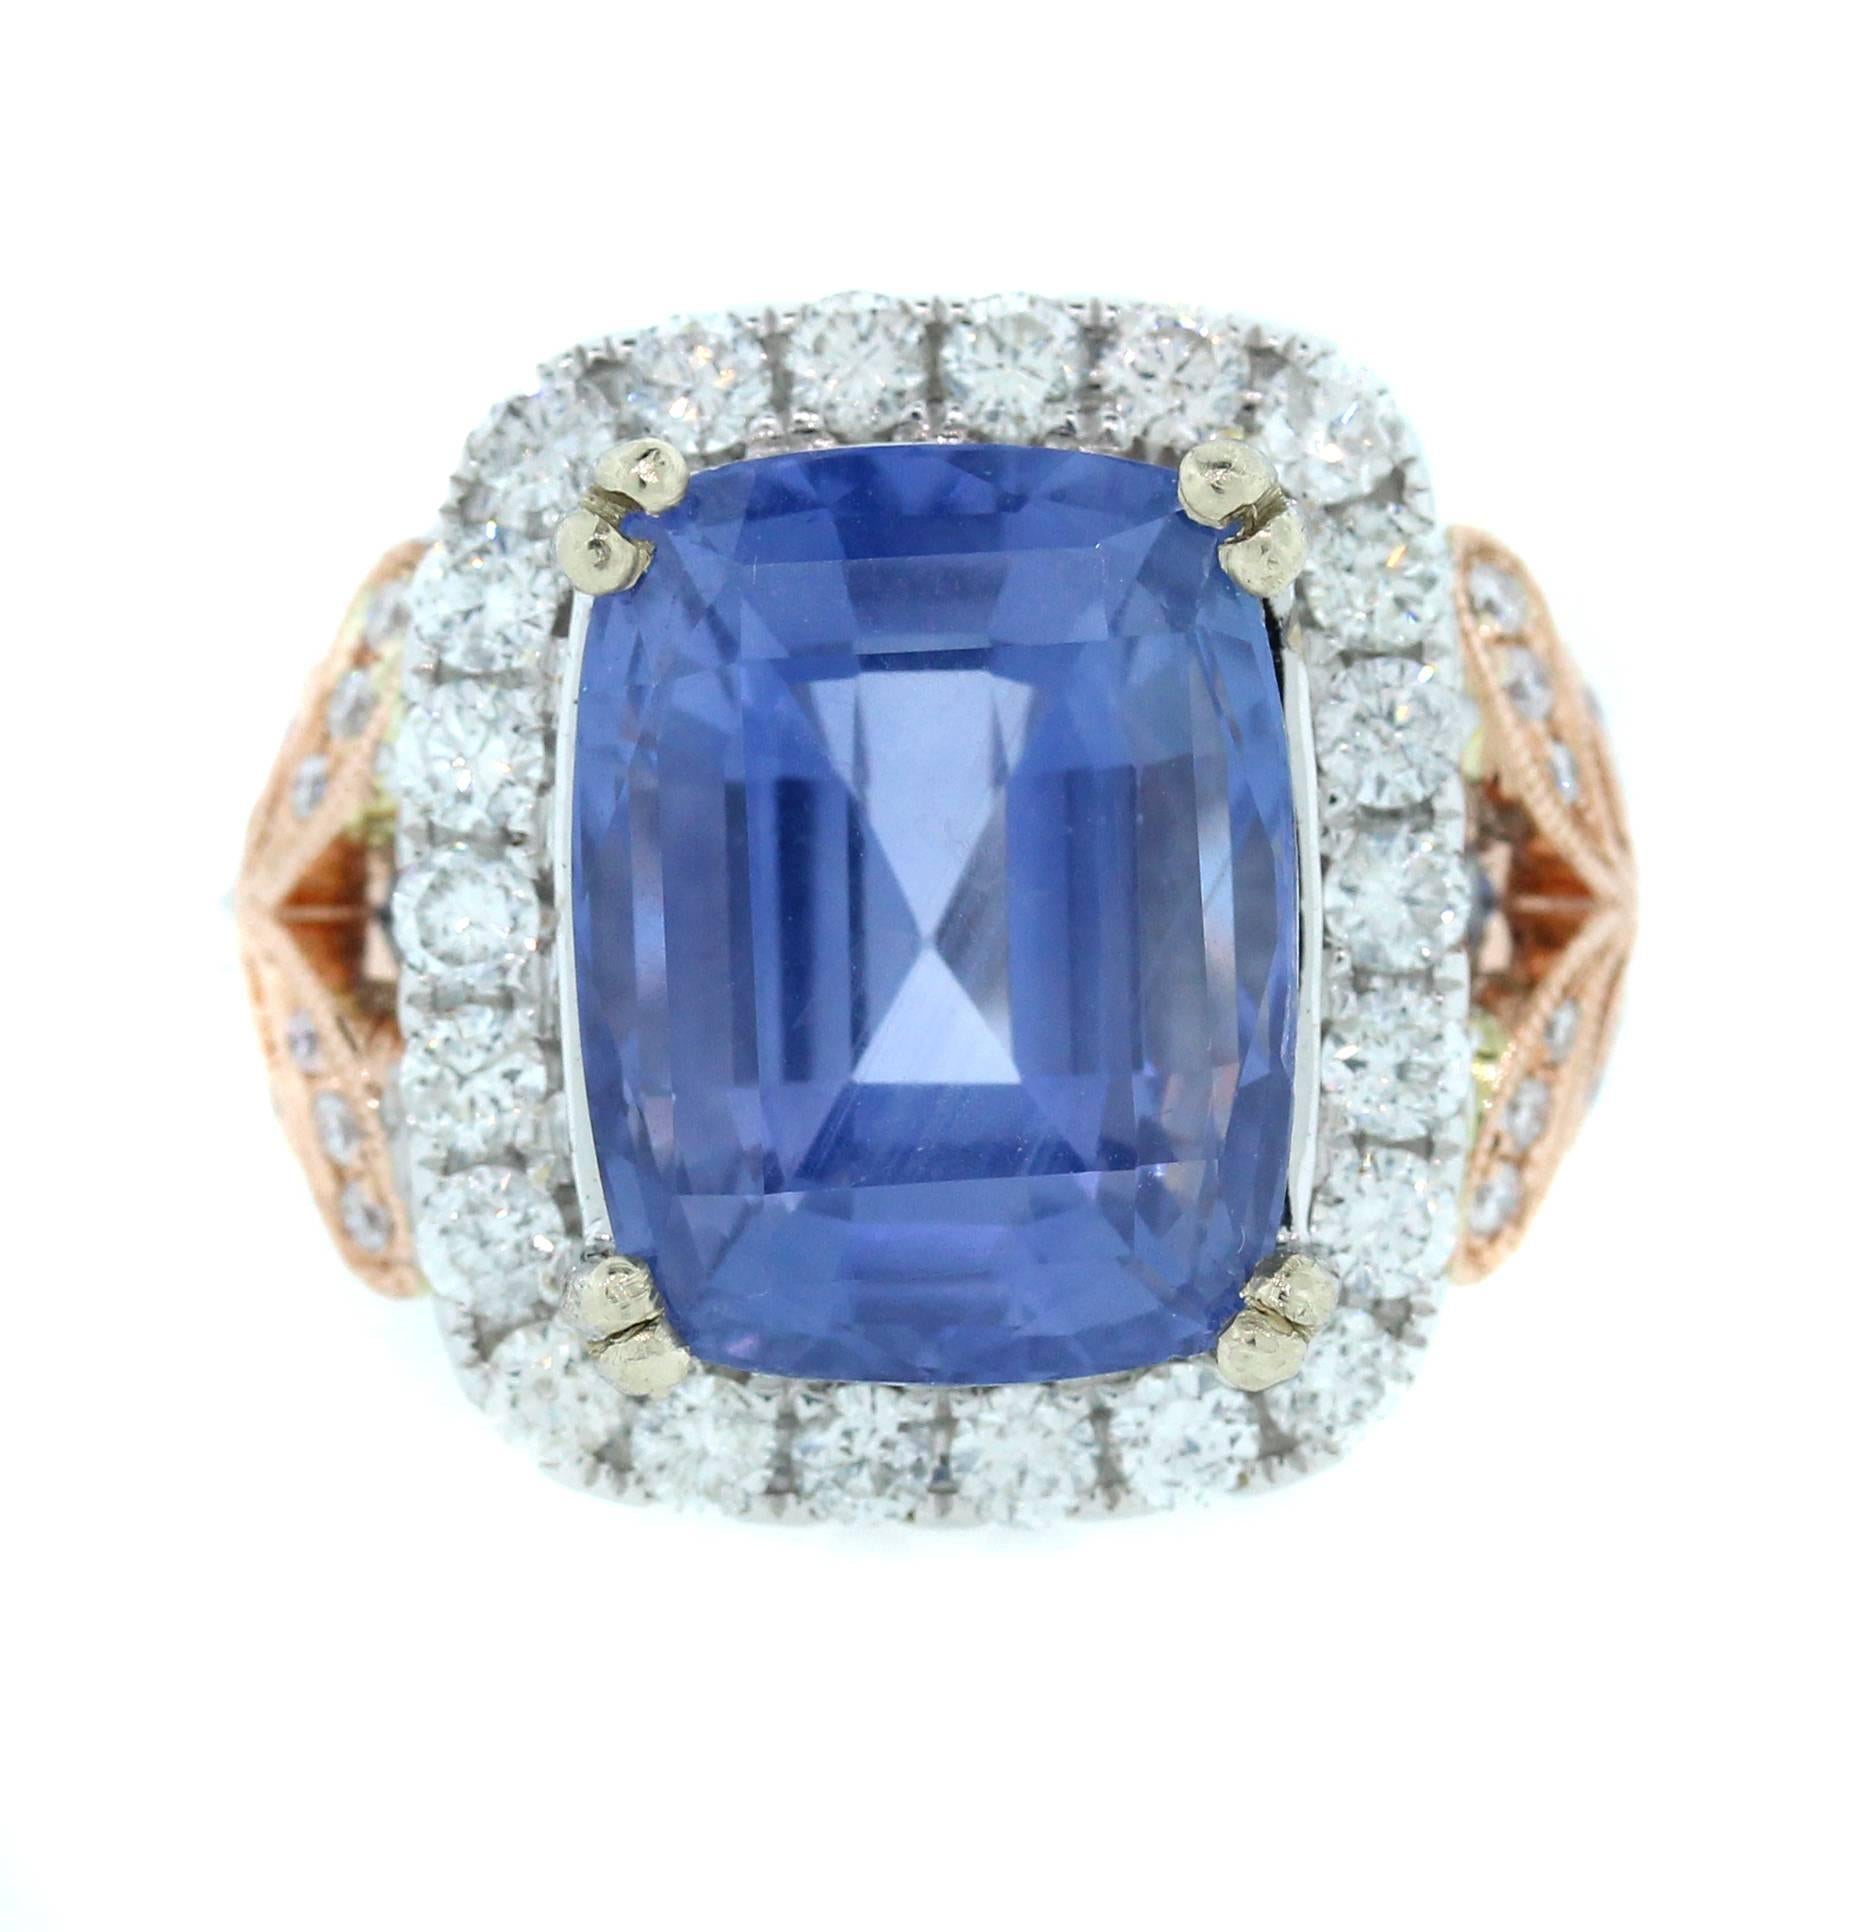 18K White and Pink Gold Ring with 10.67 Carat Ceylon Blue Sapphire Center and Diamonds

Blue Sapphire is 10.67 carat. Cushion Cut. From Ceylon (Sri Lanka). NO Heat Treatment. 

Certification states: 